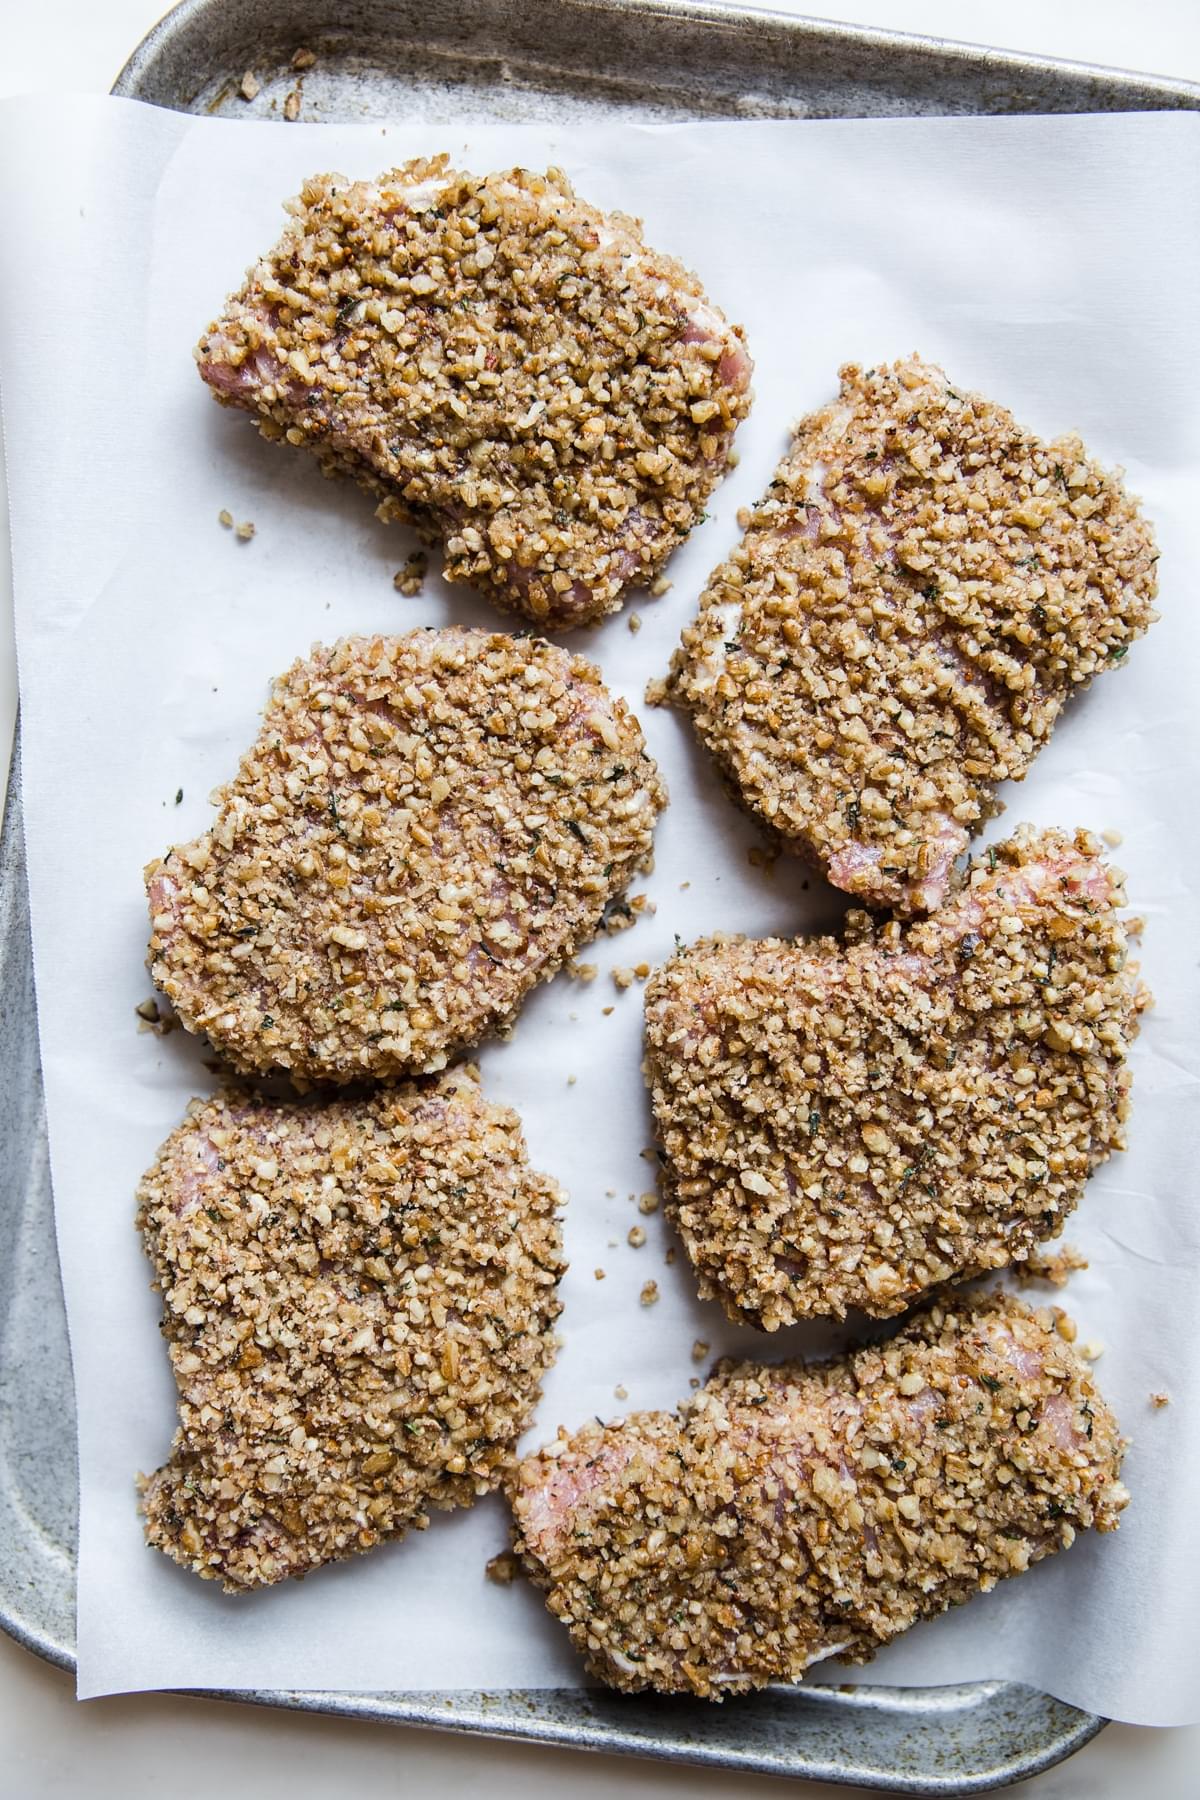 Pecan Crusted Pork Chops on parchment paper